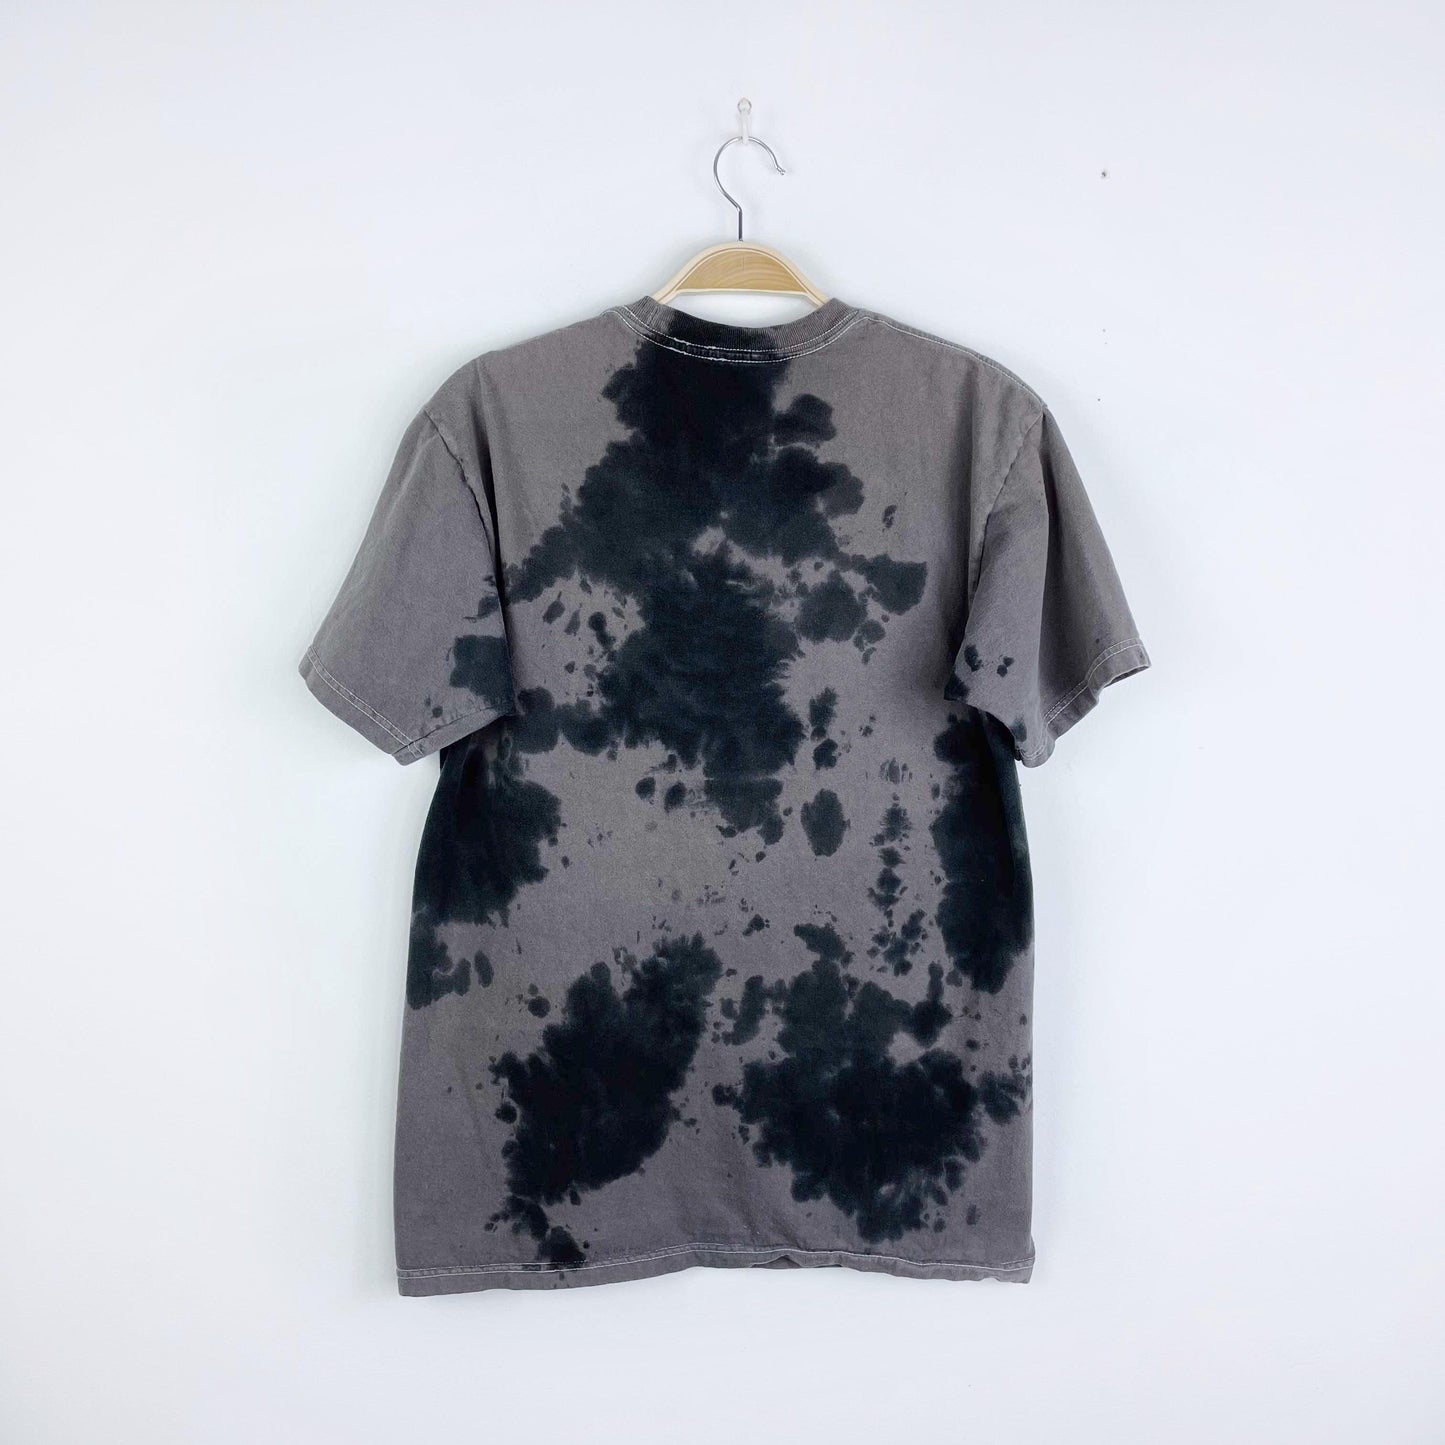 2016 ice cube bleach dye all about the benjamins tee